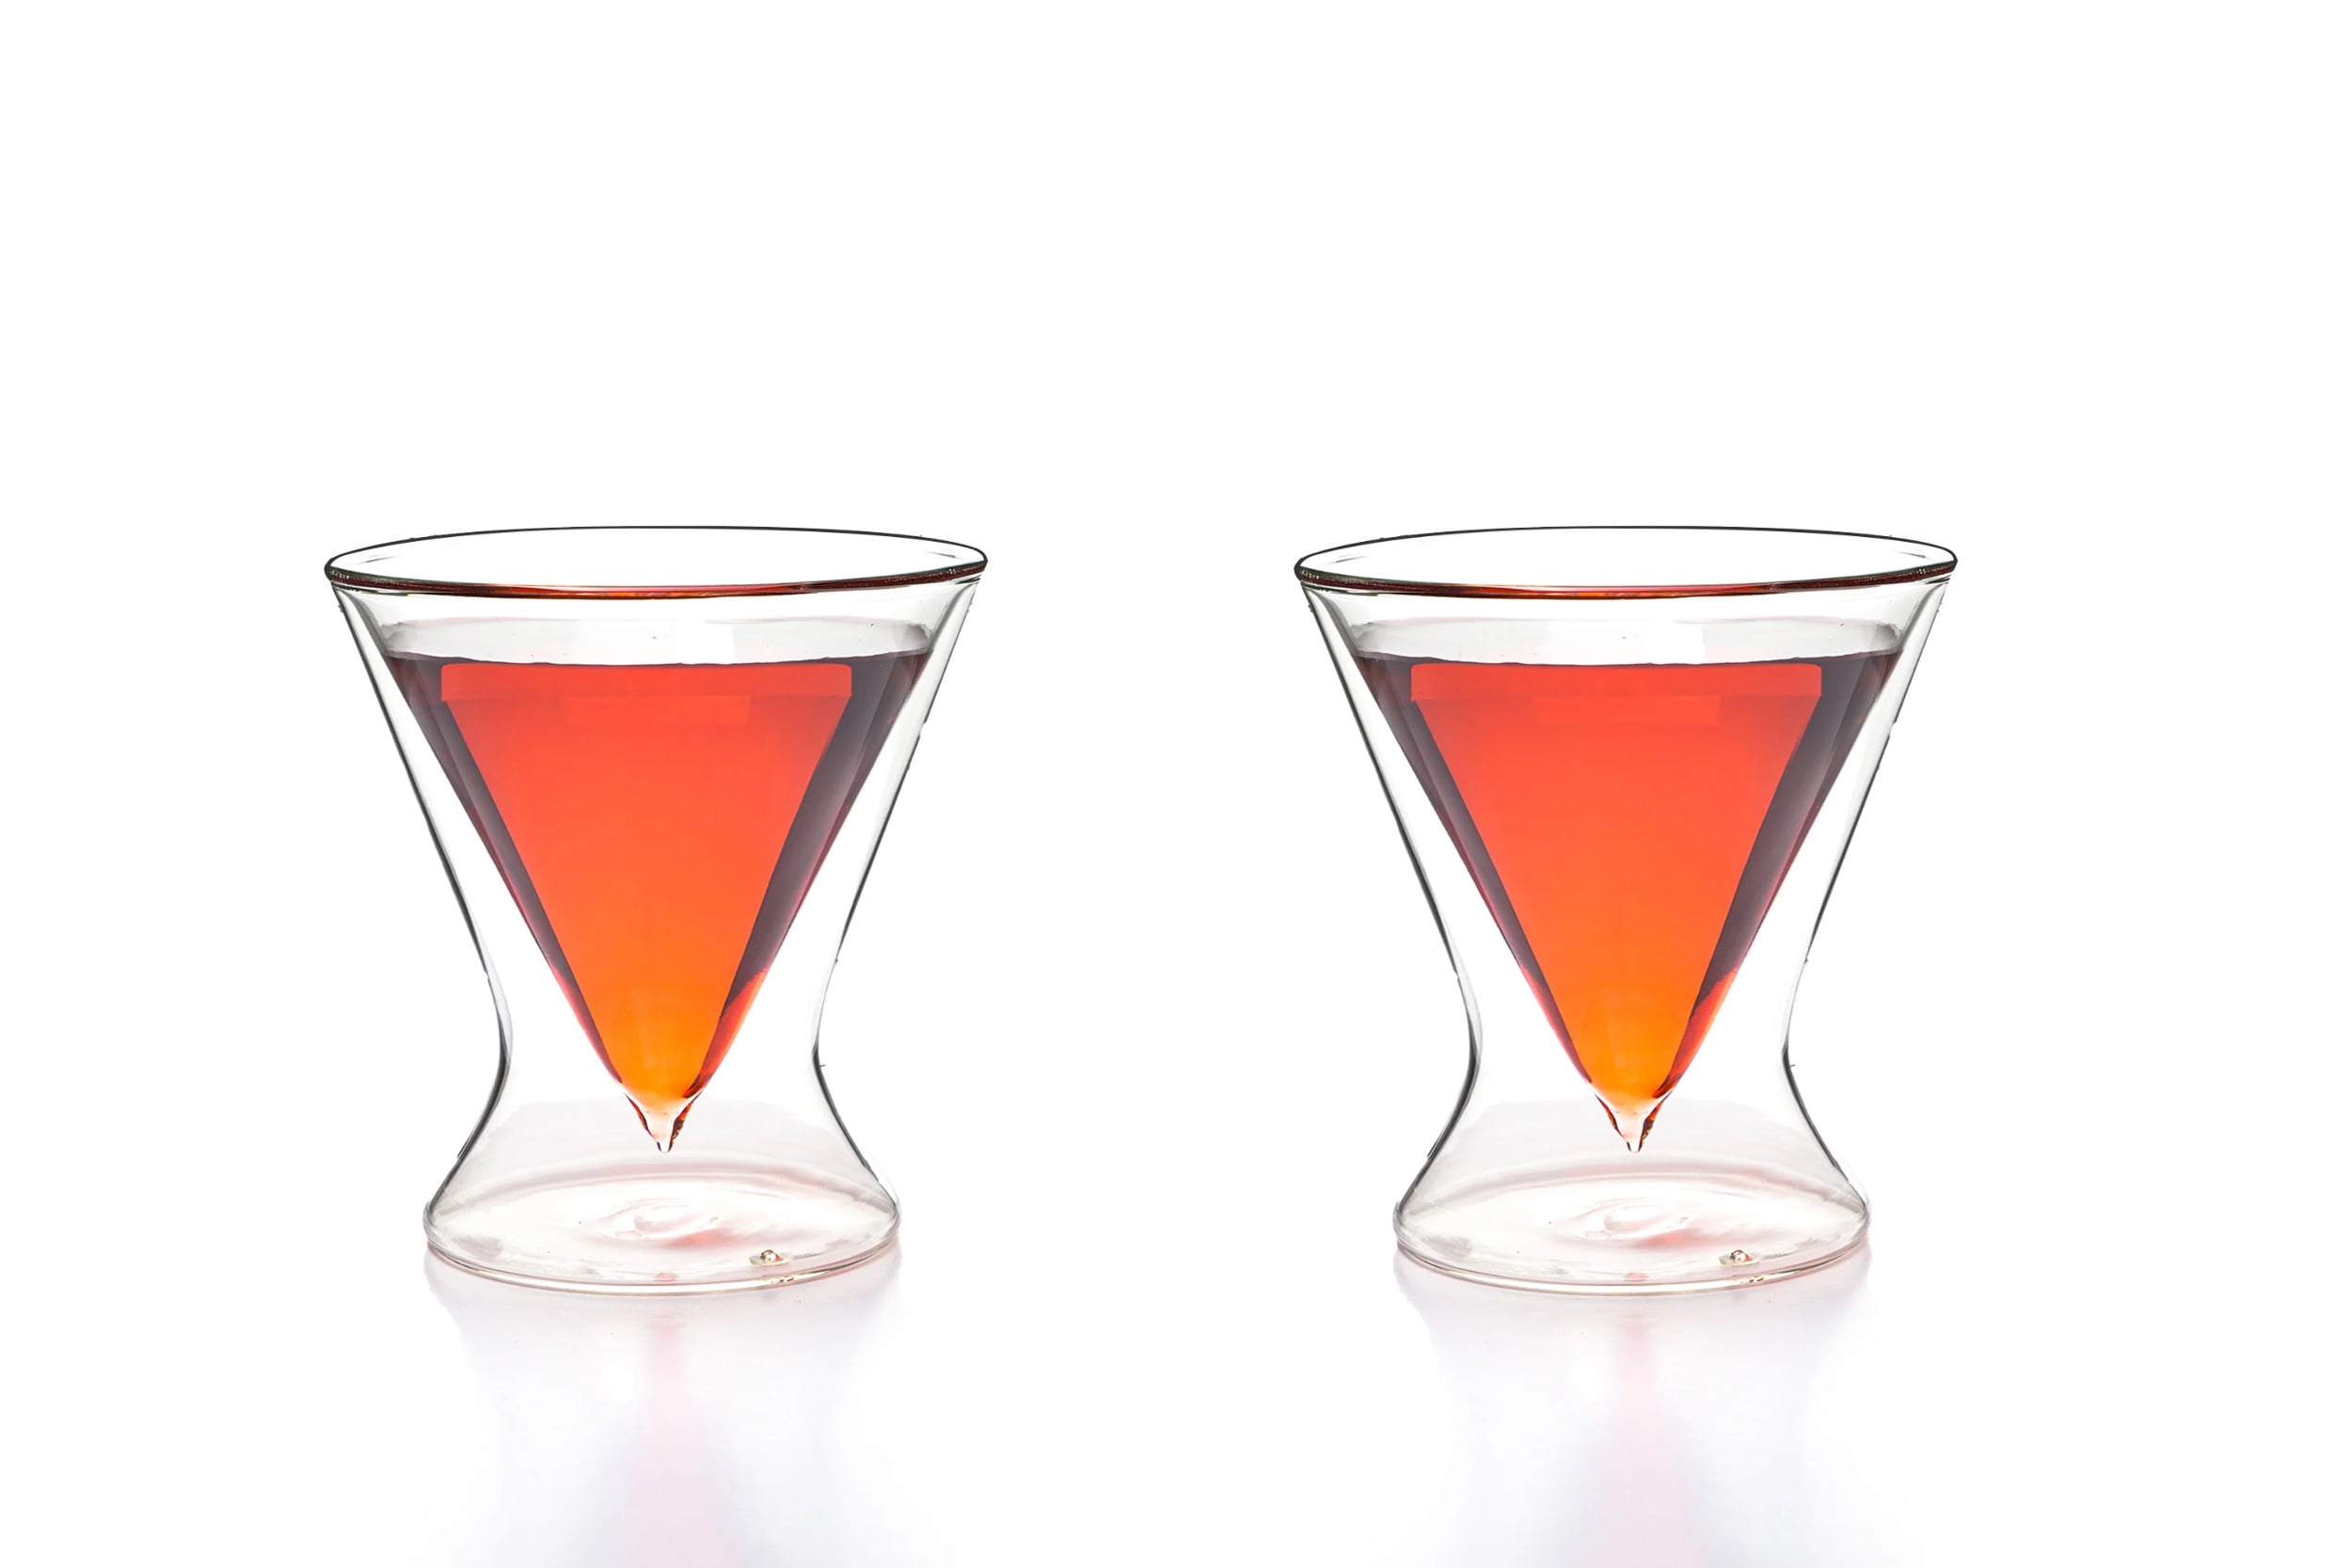 Double-Walled Martini Glasses Set of 2 (6.5 oz) - Stemless Martini,  Cocktail, Bar, Cosmopolitan Glas…See more Double-Walled Martini Glasses Set  of 2